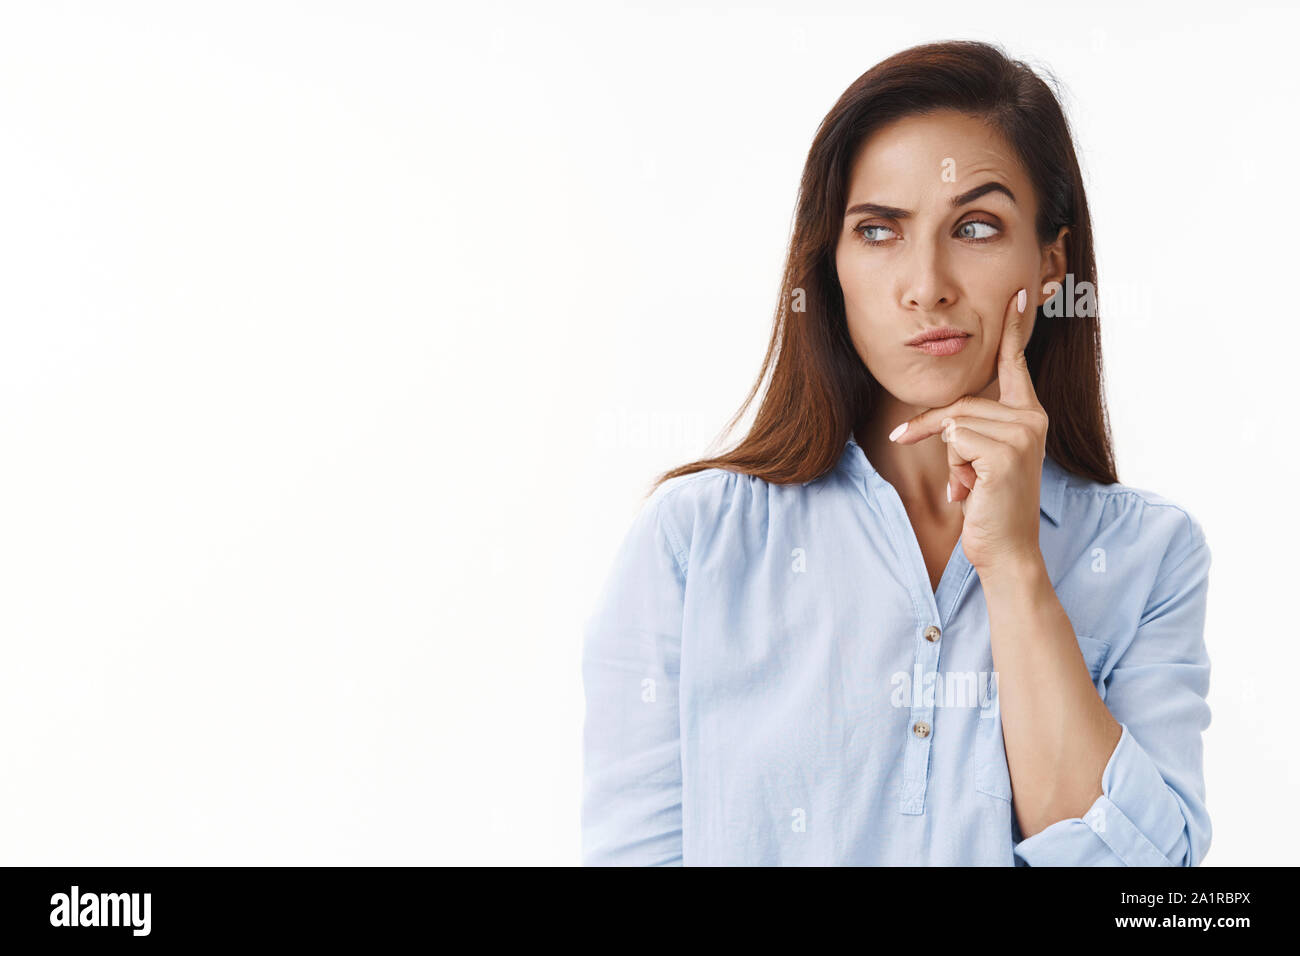 Suspicious brunette middle-aged 30s wife have some thoughts, smirk sly, squinting thoughtful, pondering strange situation, look sideways copyspace Stock Photo